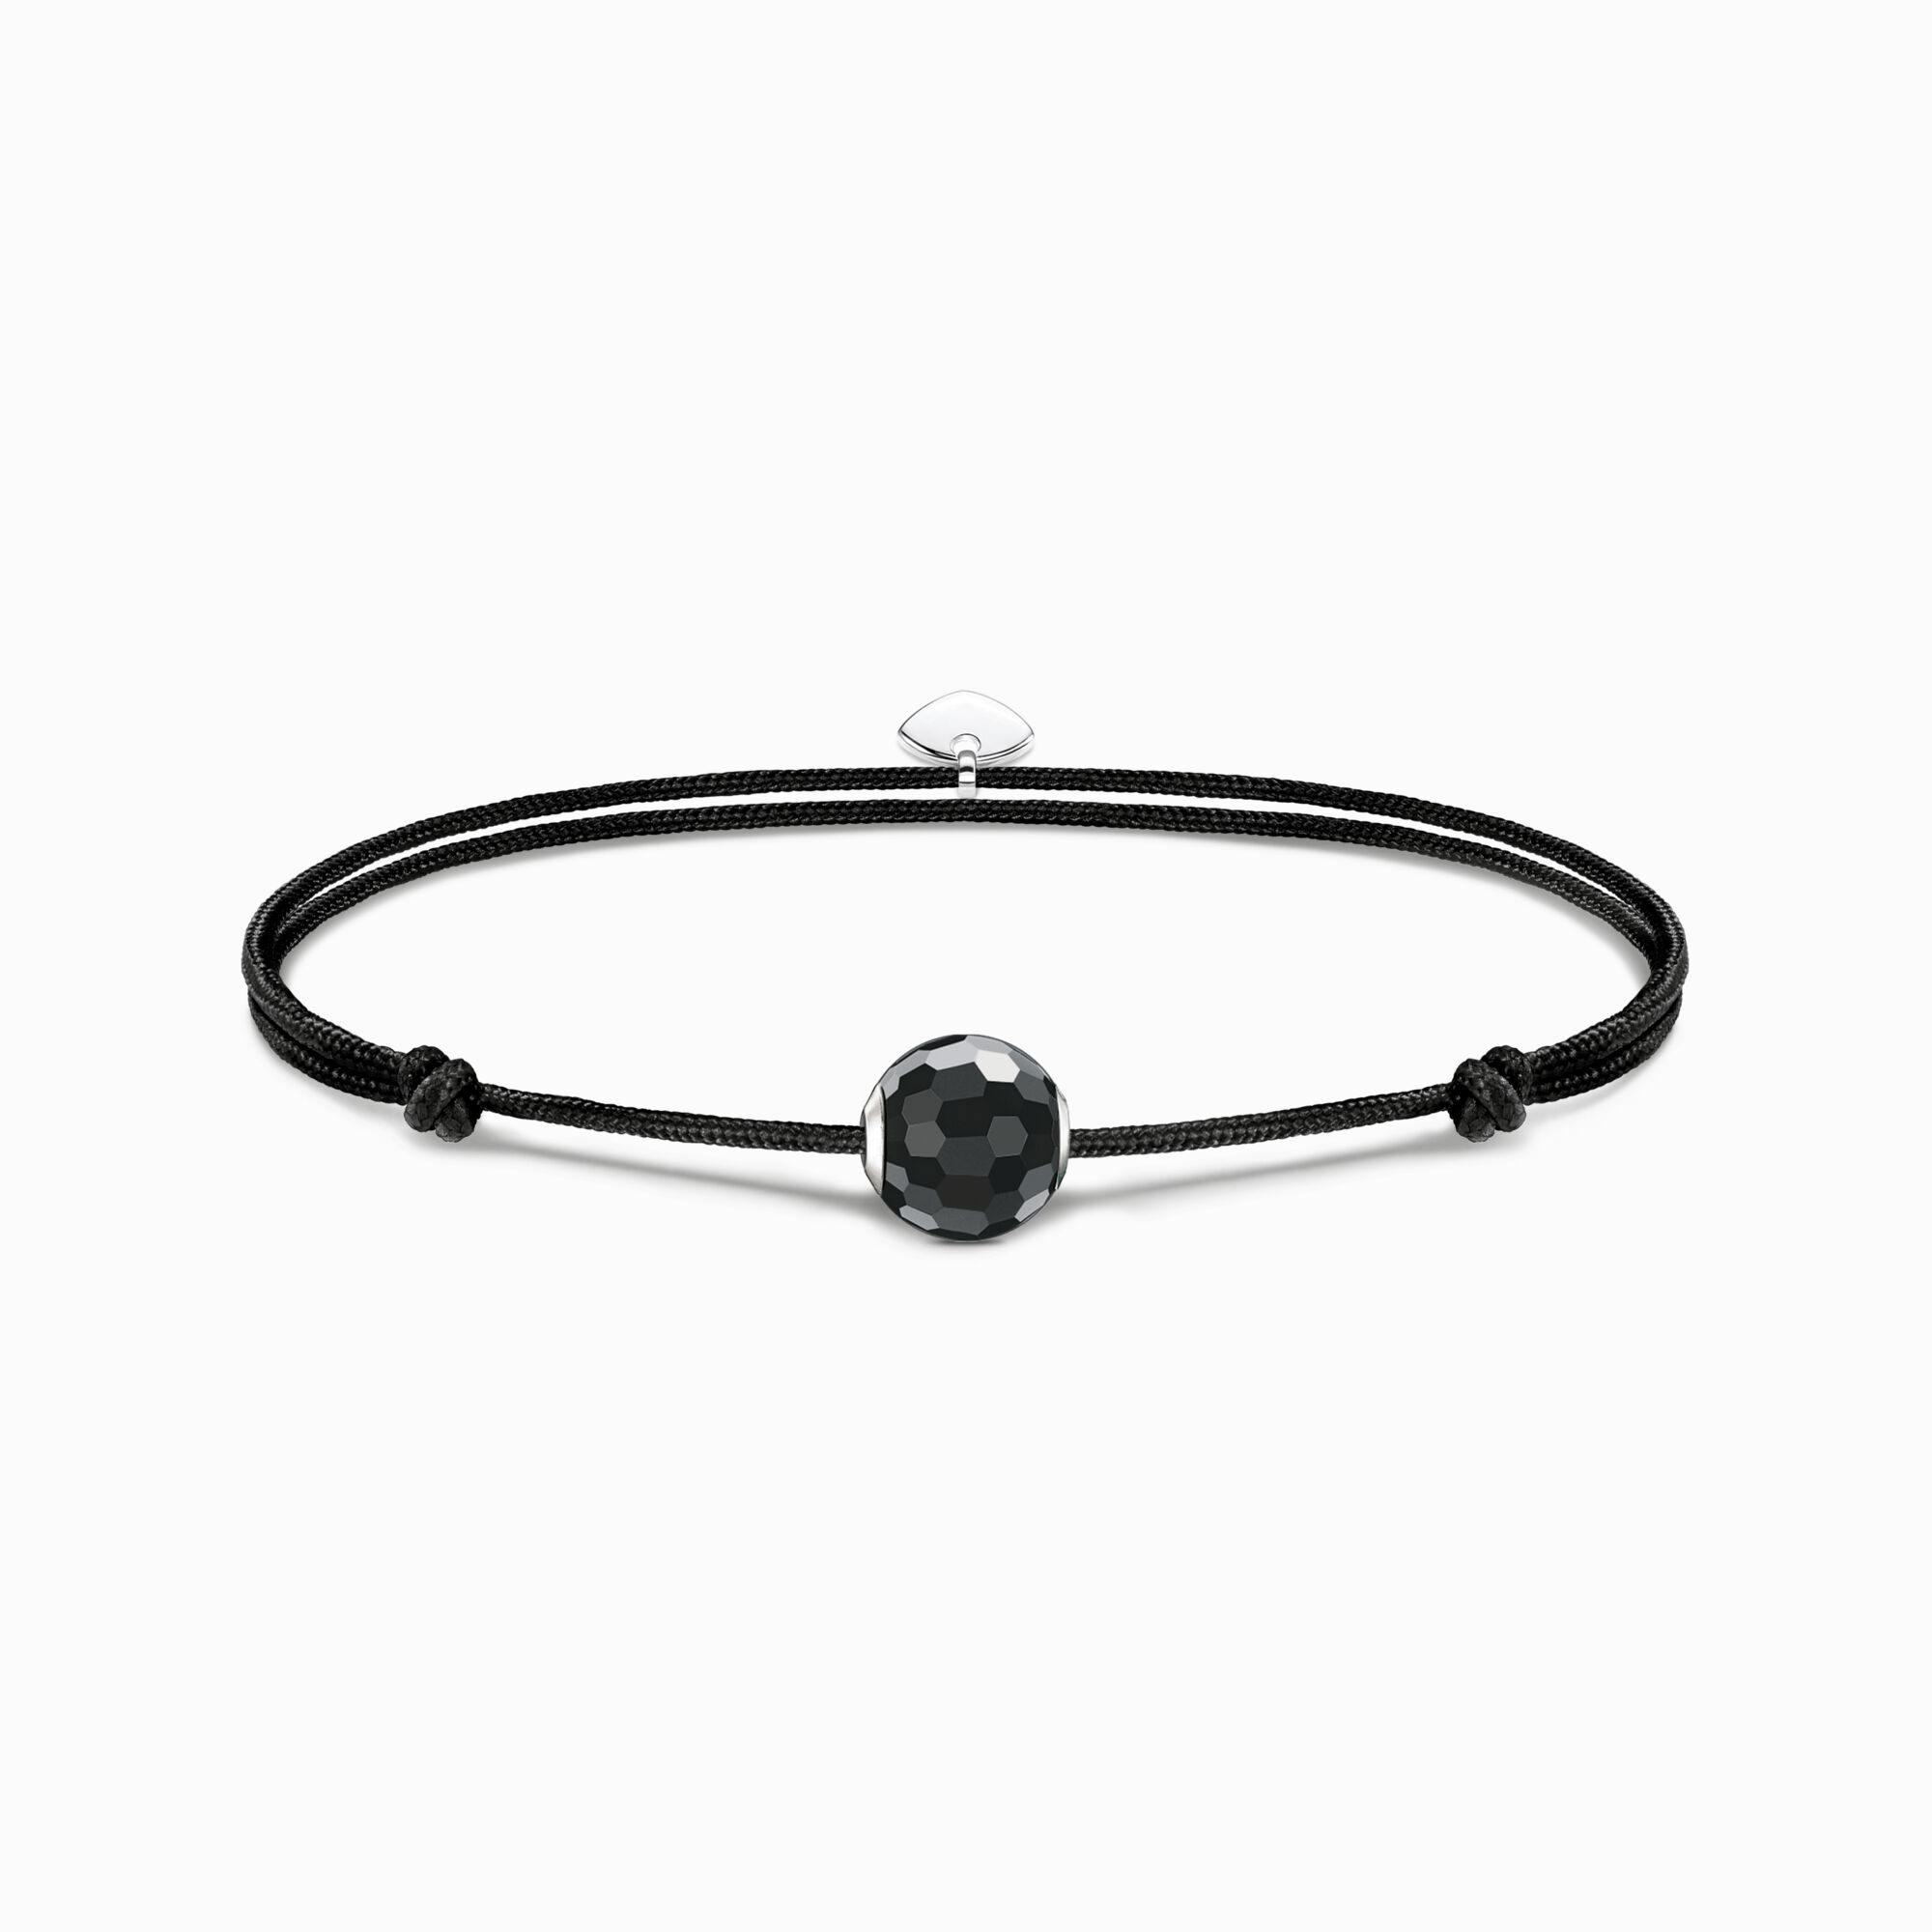 Bracelet Karma Secret with black obsidian Bead from the Karma Beads collection in the THOMAS SABO online store